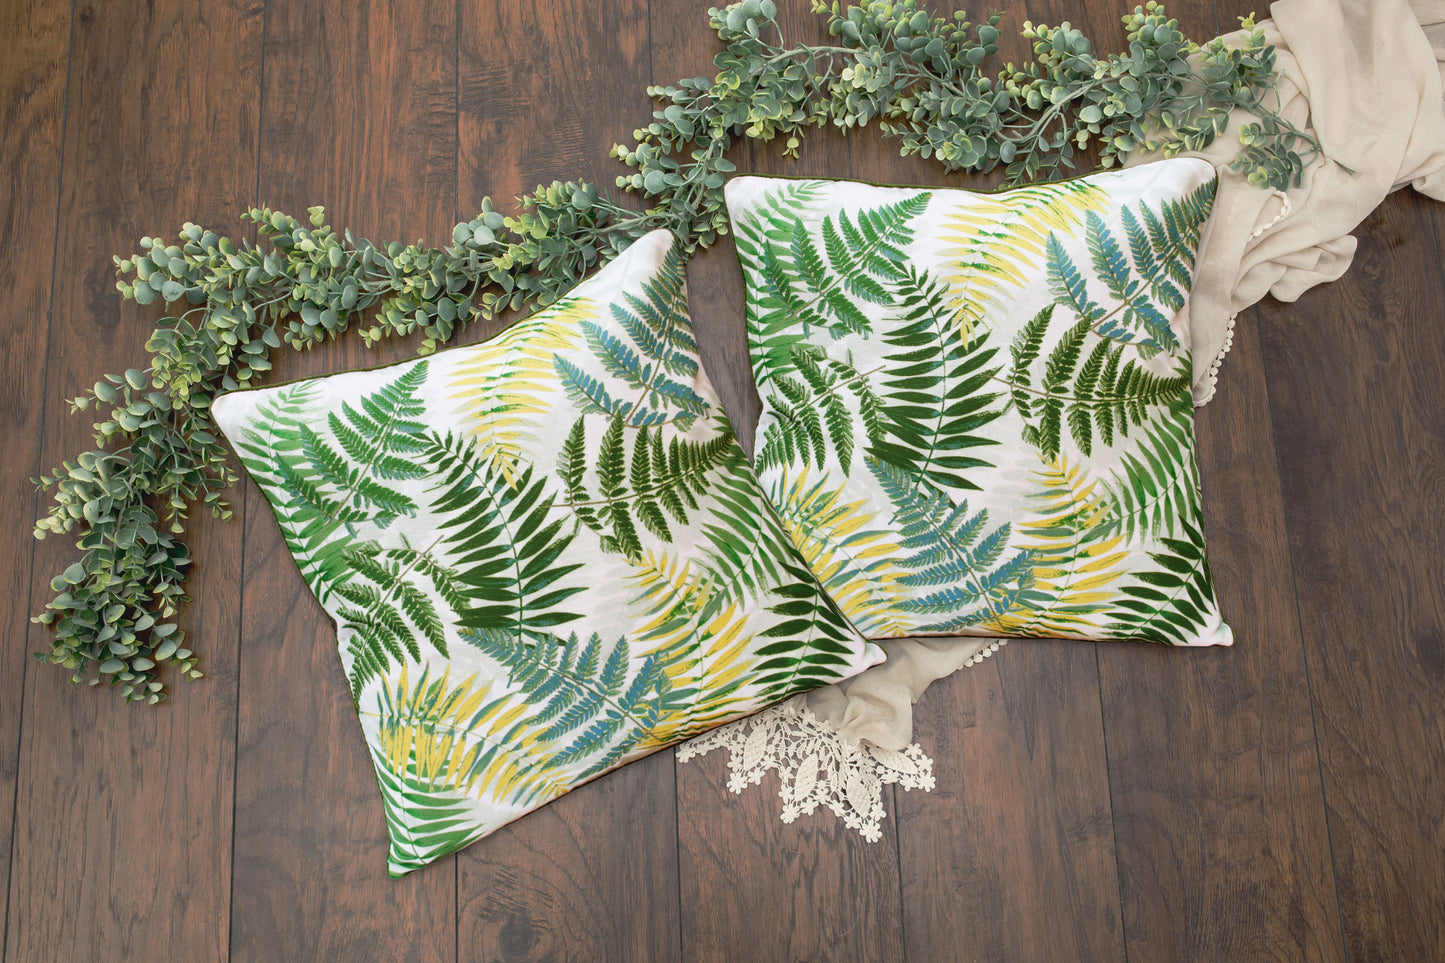 Set of Two 20" X 20" Green and Yellow Botanical Polyester Zippered Pillow